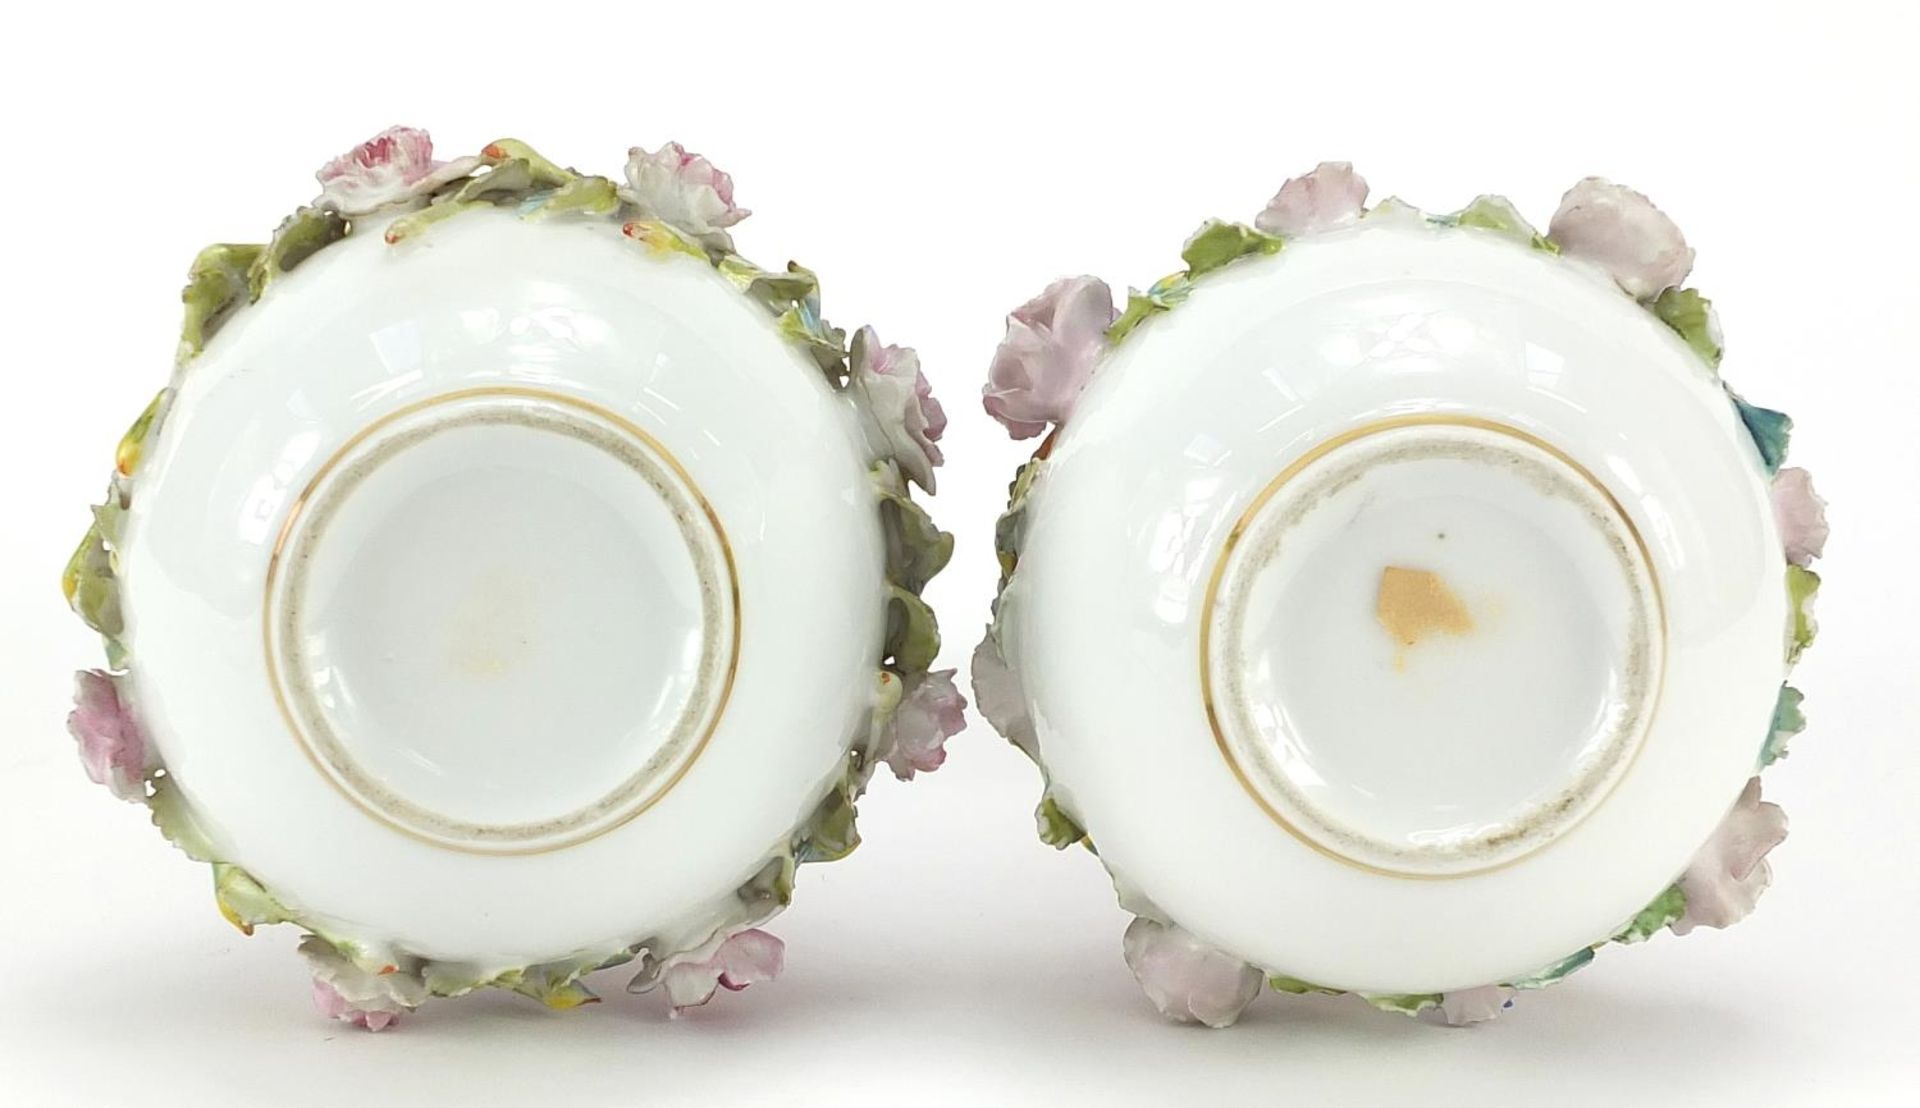 Pair of 19th century French pink ground vases with floral encrusted band, each 16cm high - Image 3 of 3